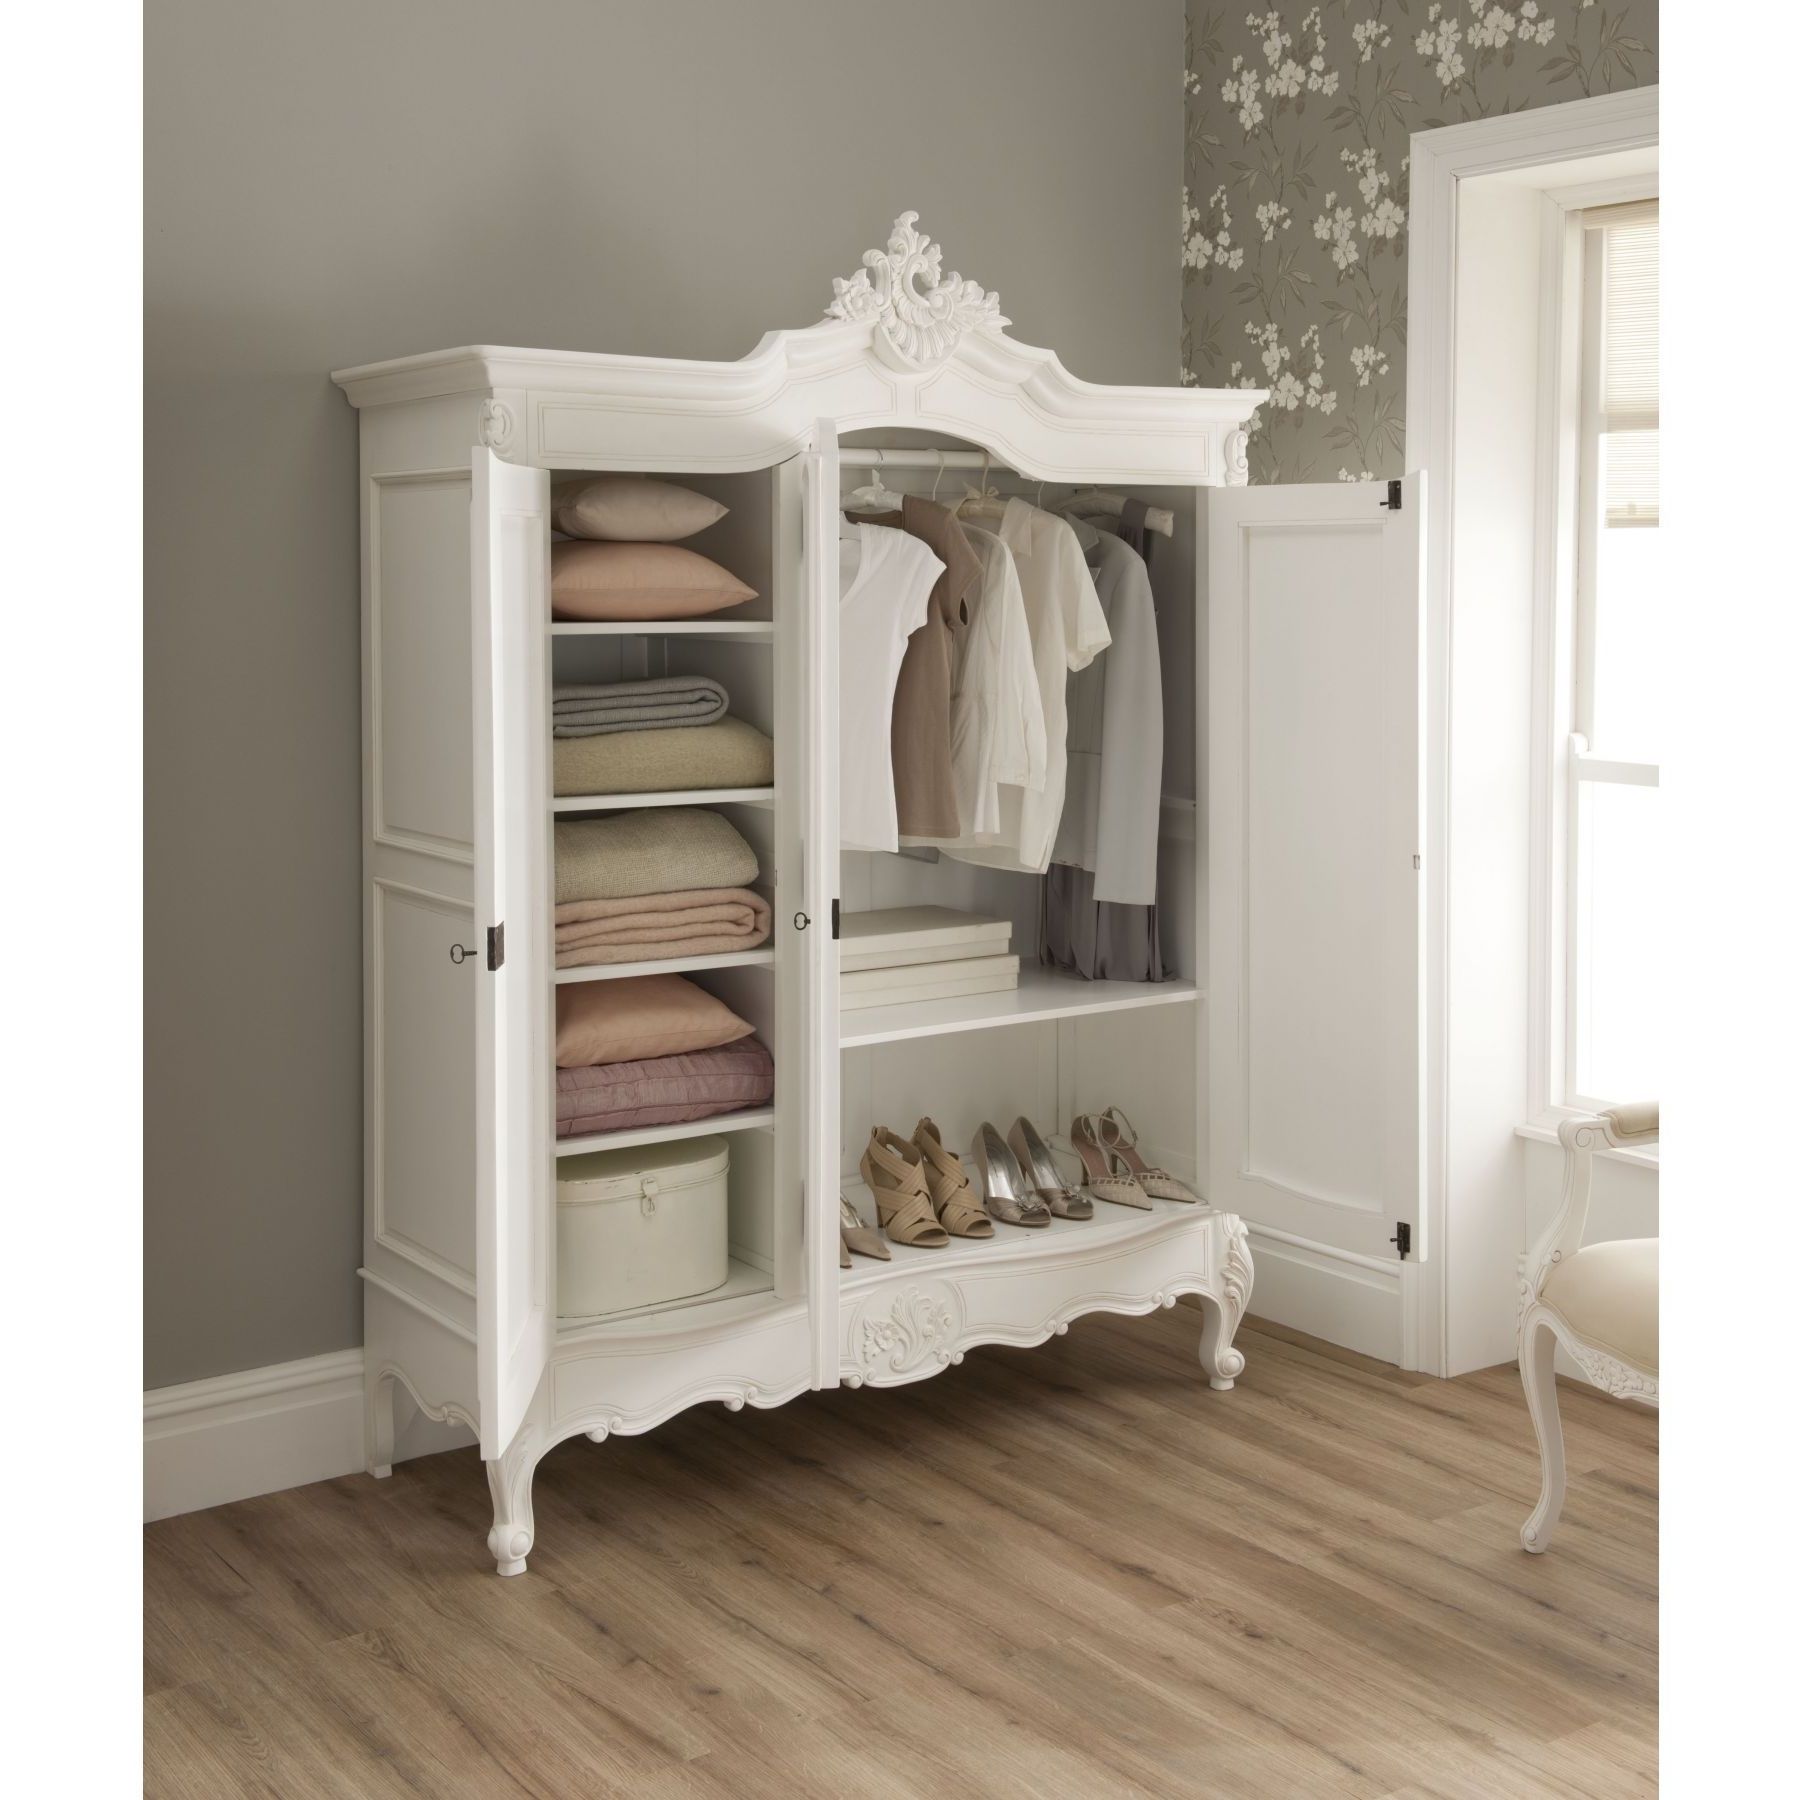 French Wardrobes Pertaining To Favorite A Wardrobe Is The Perfect Addition To A Baby's Room To Stylishly (View 10 of 15)